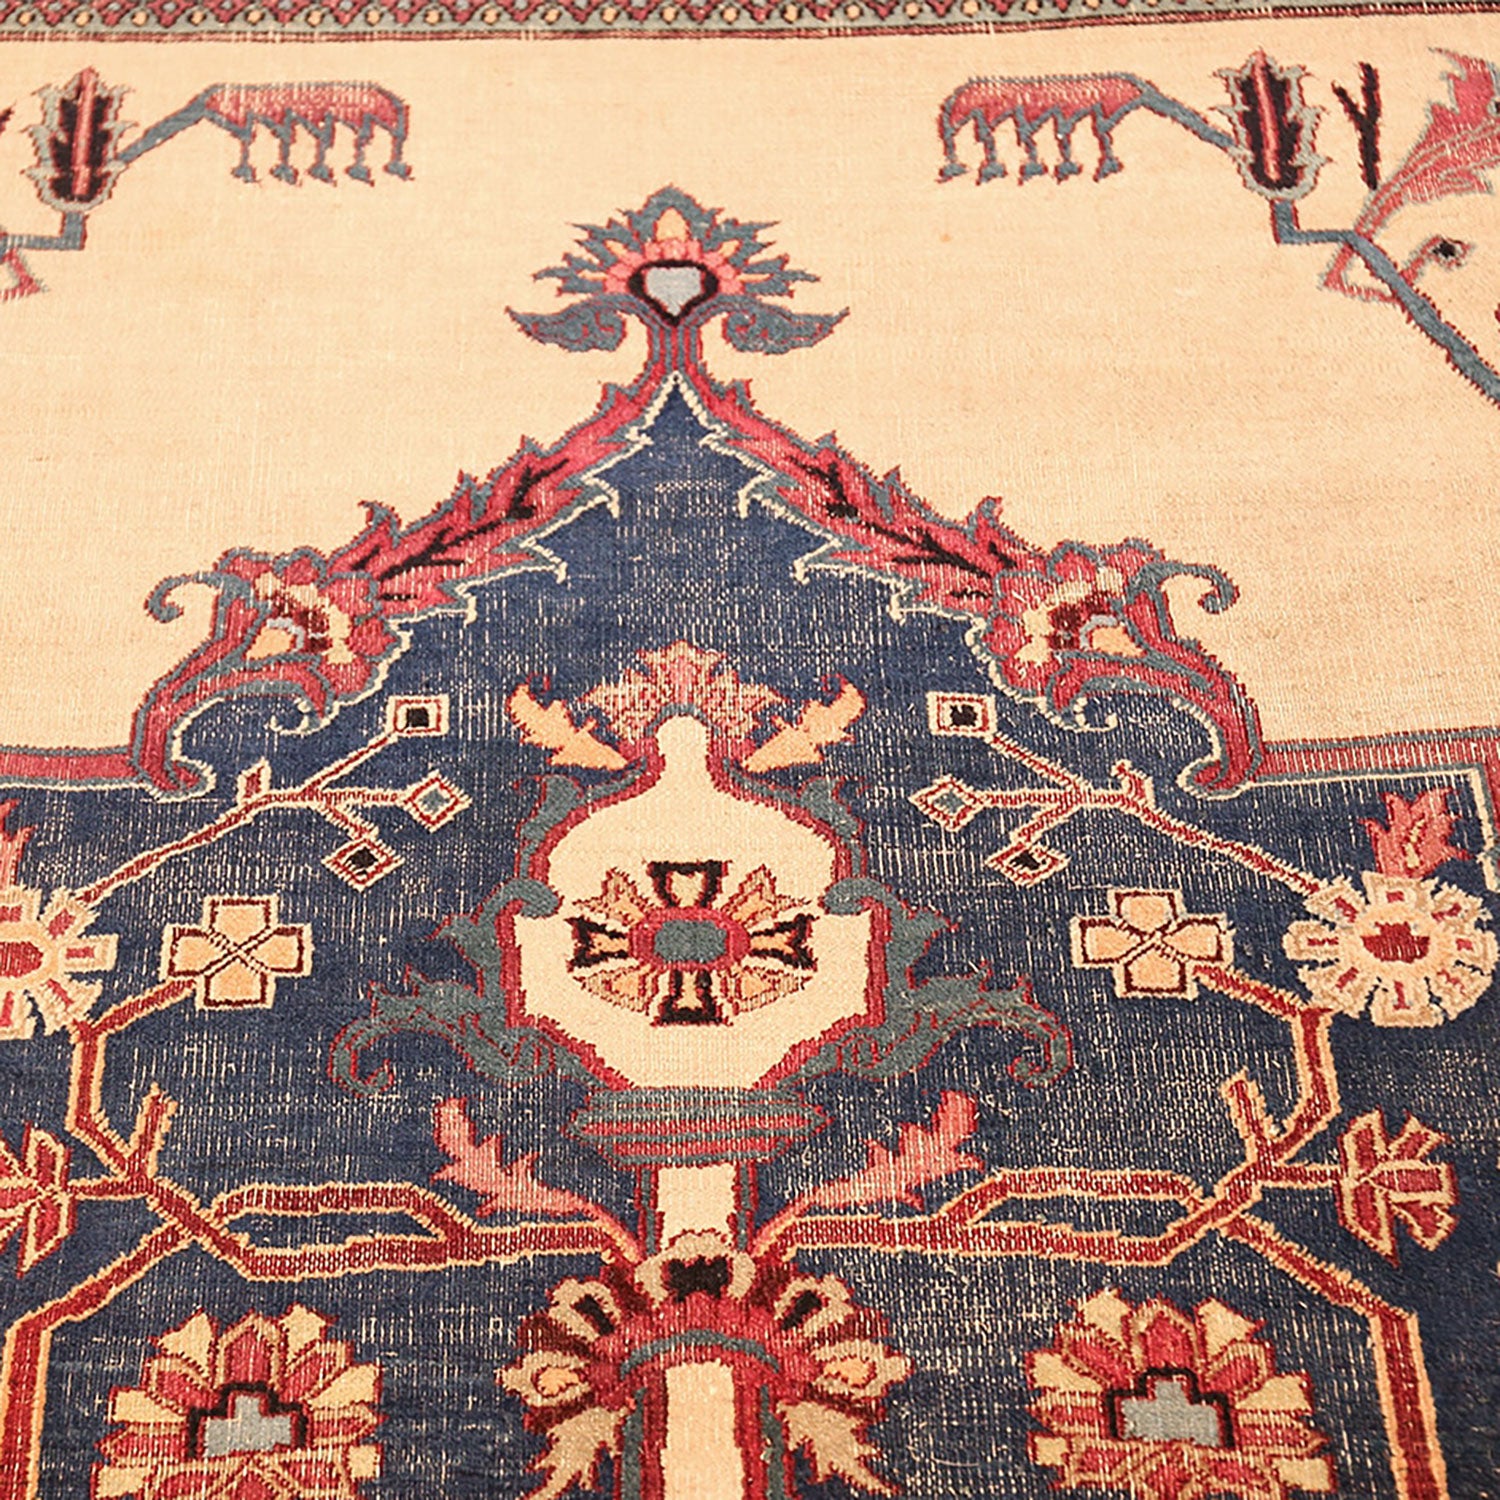 Intricately designed traditional rug with symmetrical floral and geometric motifs.